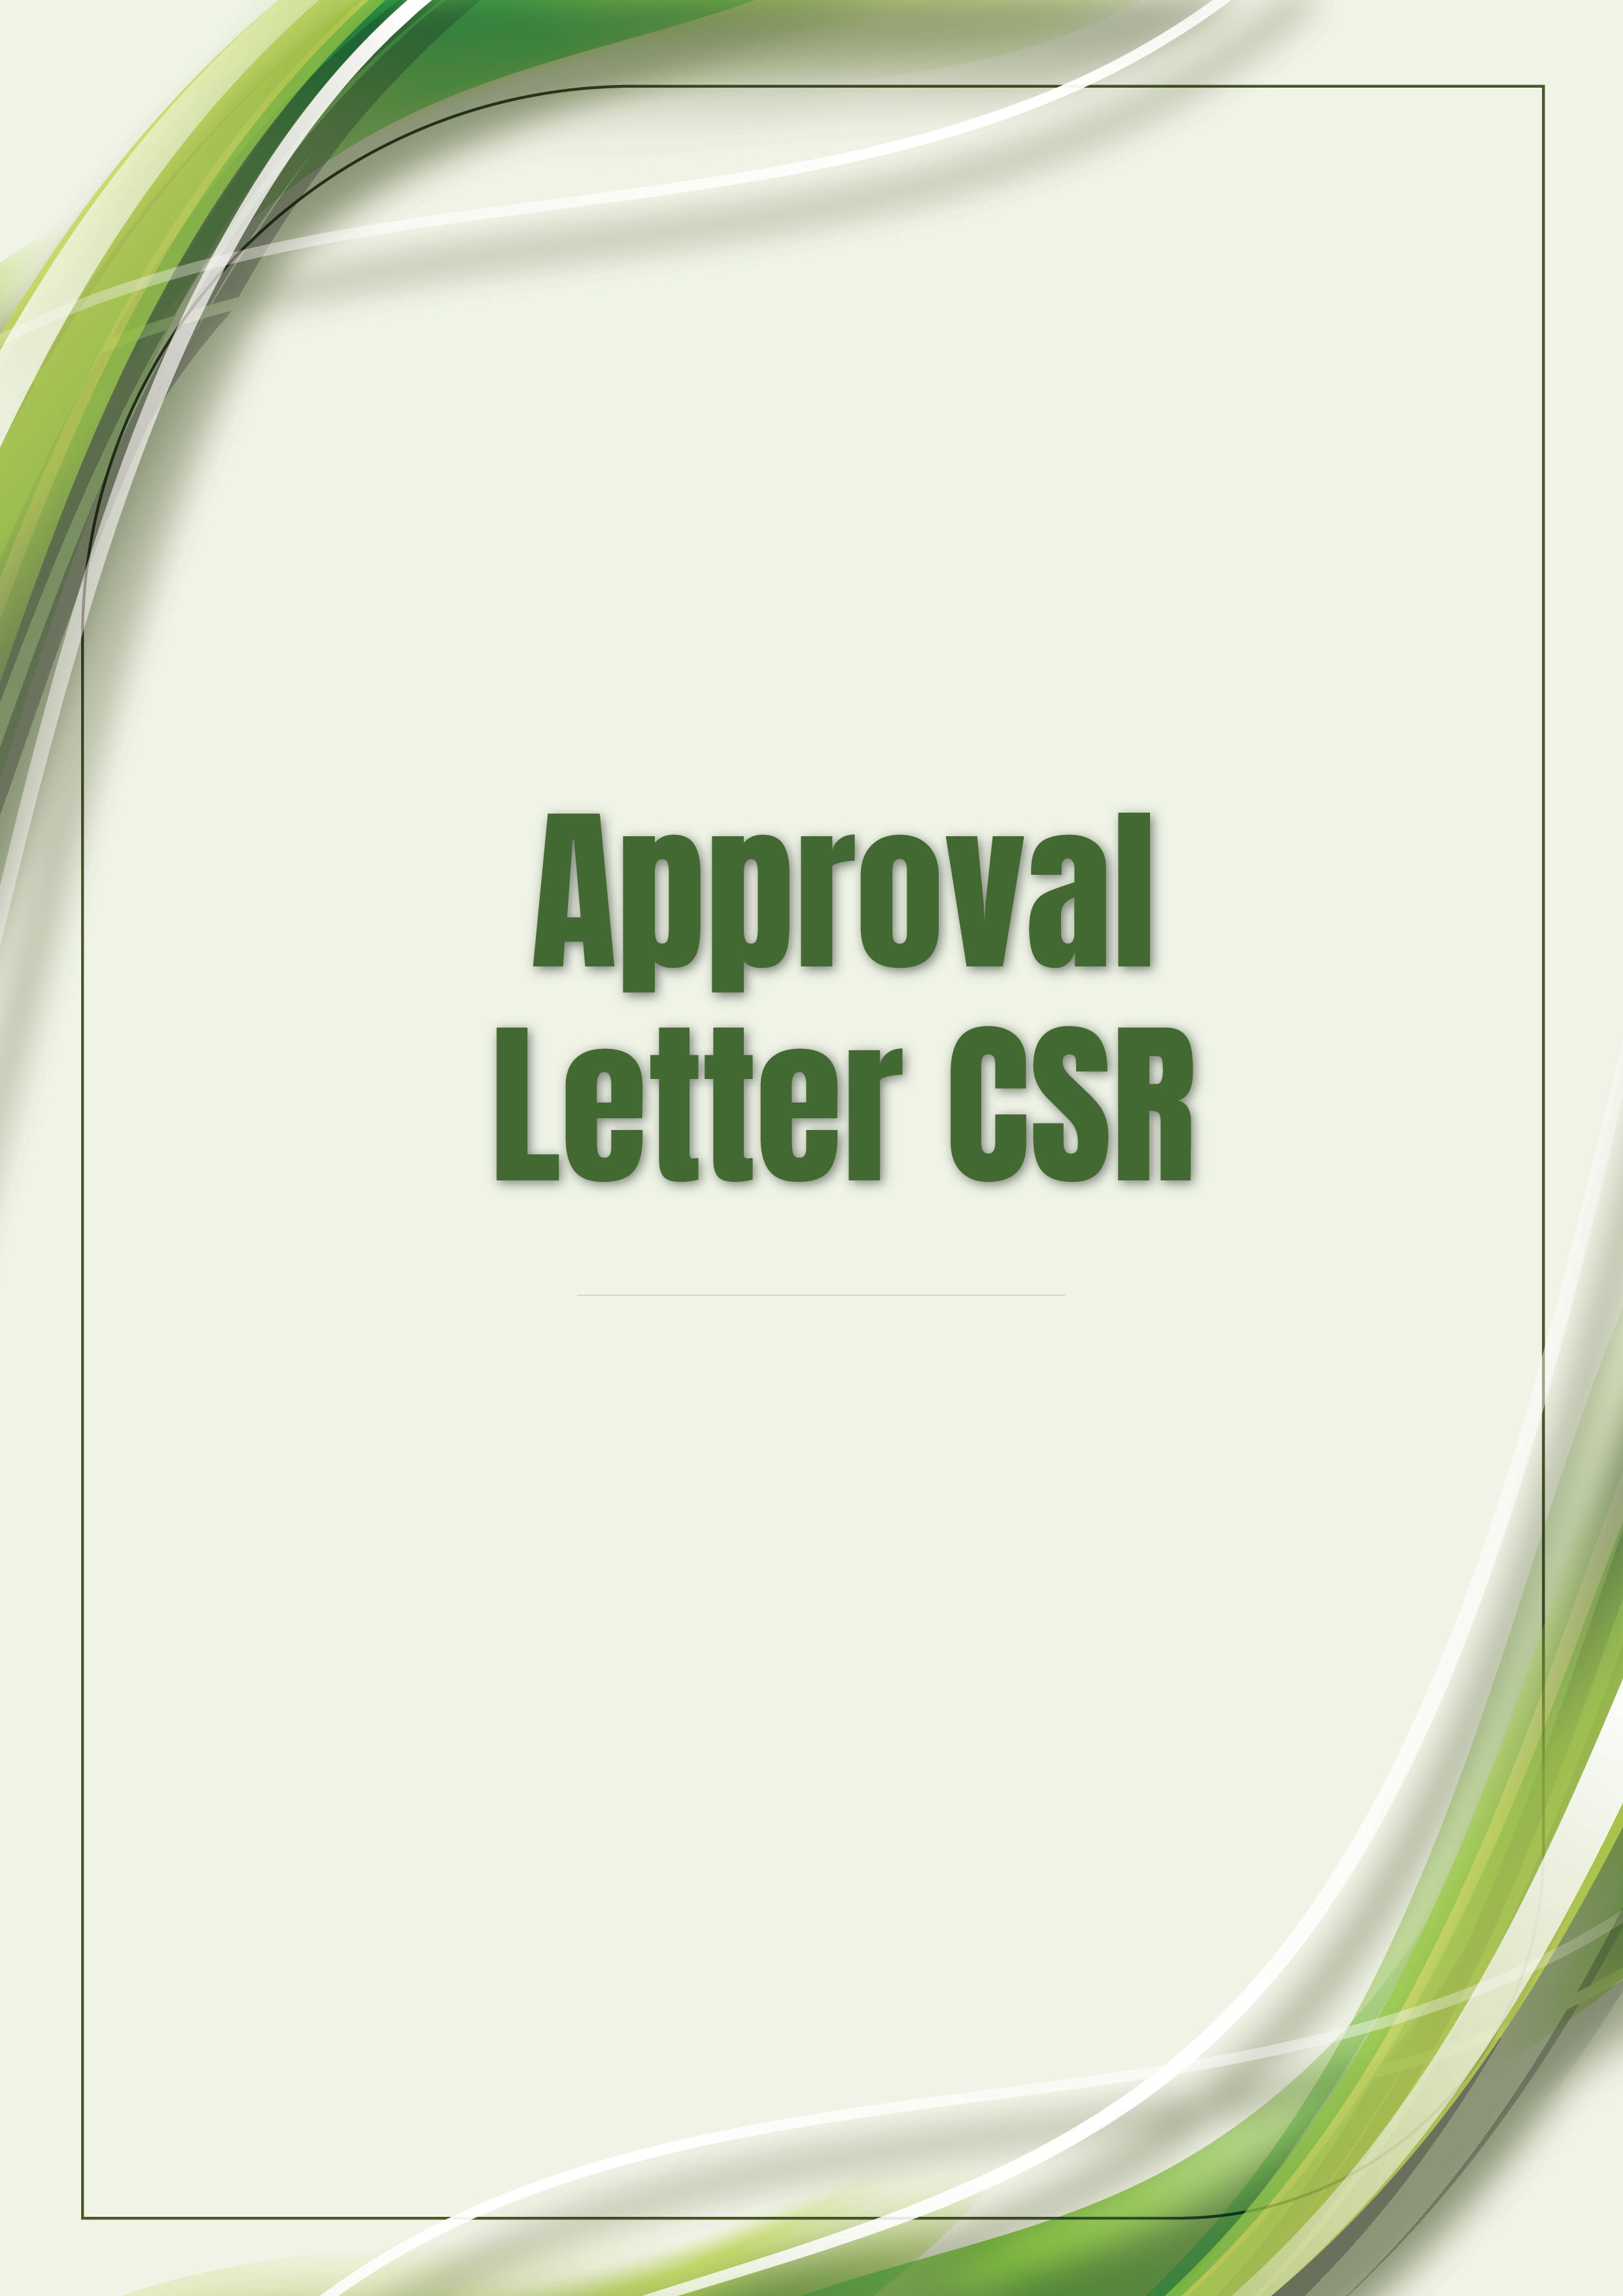 Approval Letter for from CSR